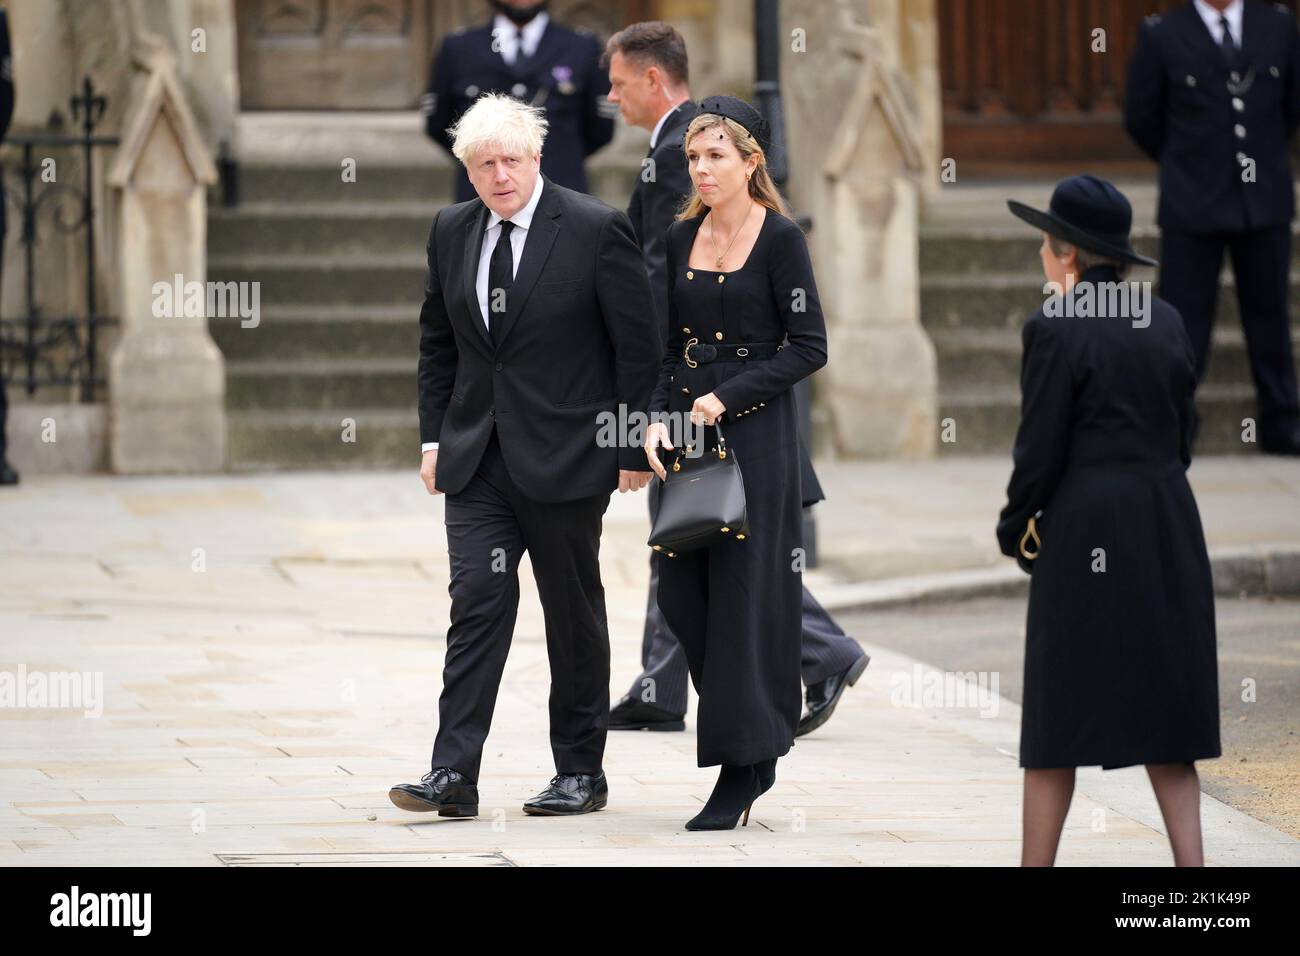 Former prime ministers Theresa May (right) and Boris Johnson with his wife Carrie Johnson arriving at the State Funeral of Queen Elizabeth II, held at Westminster Abbey, London. Picture date: Monday September 19, 2022. Stock Photo